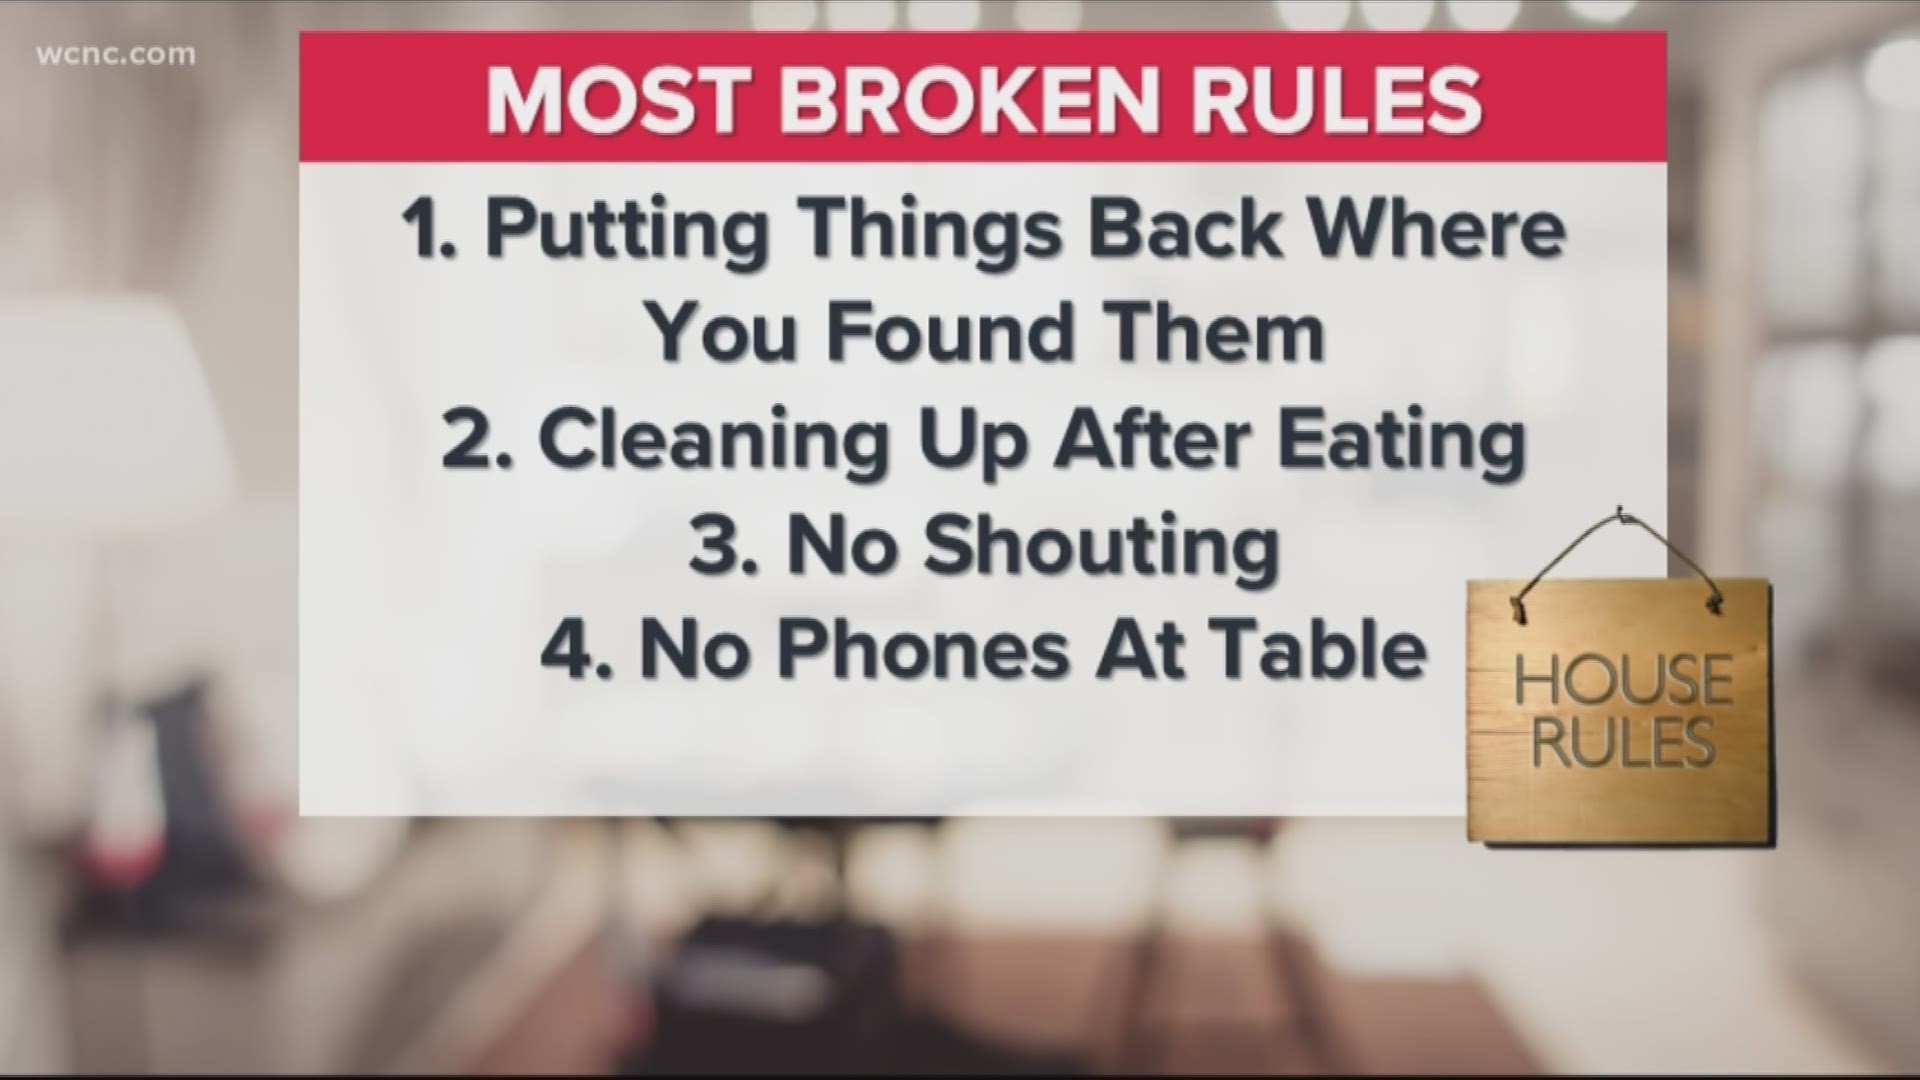 If you're a rule-breaker, you're not alone. According to a new study, 85% of families say house rules are necessary to keep order in their home.